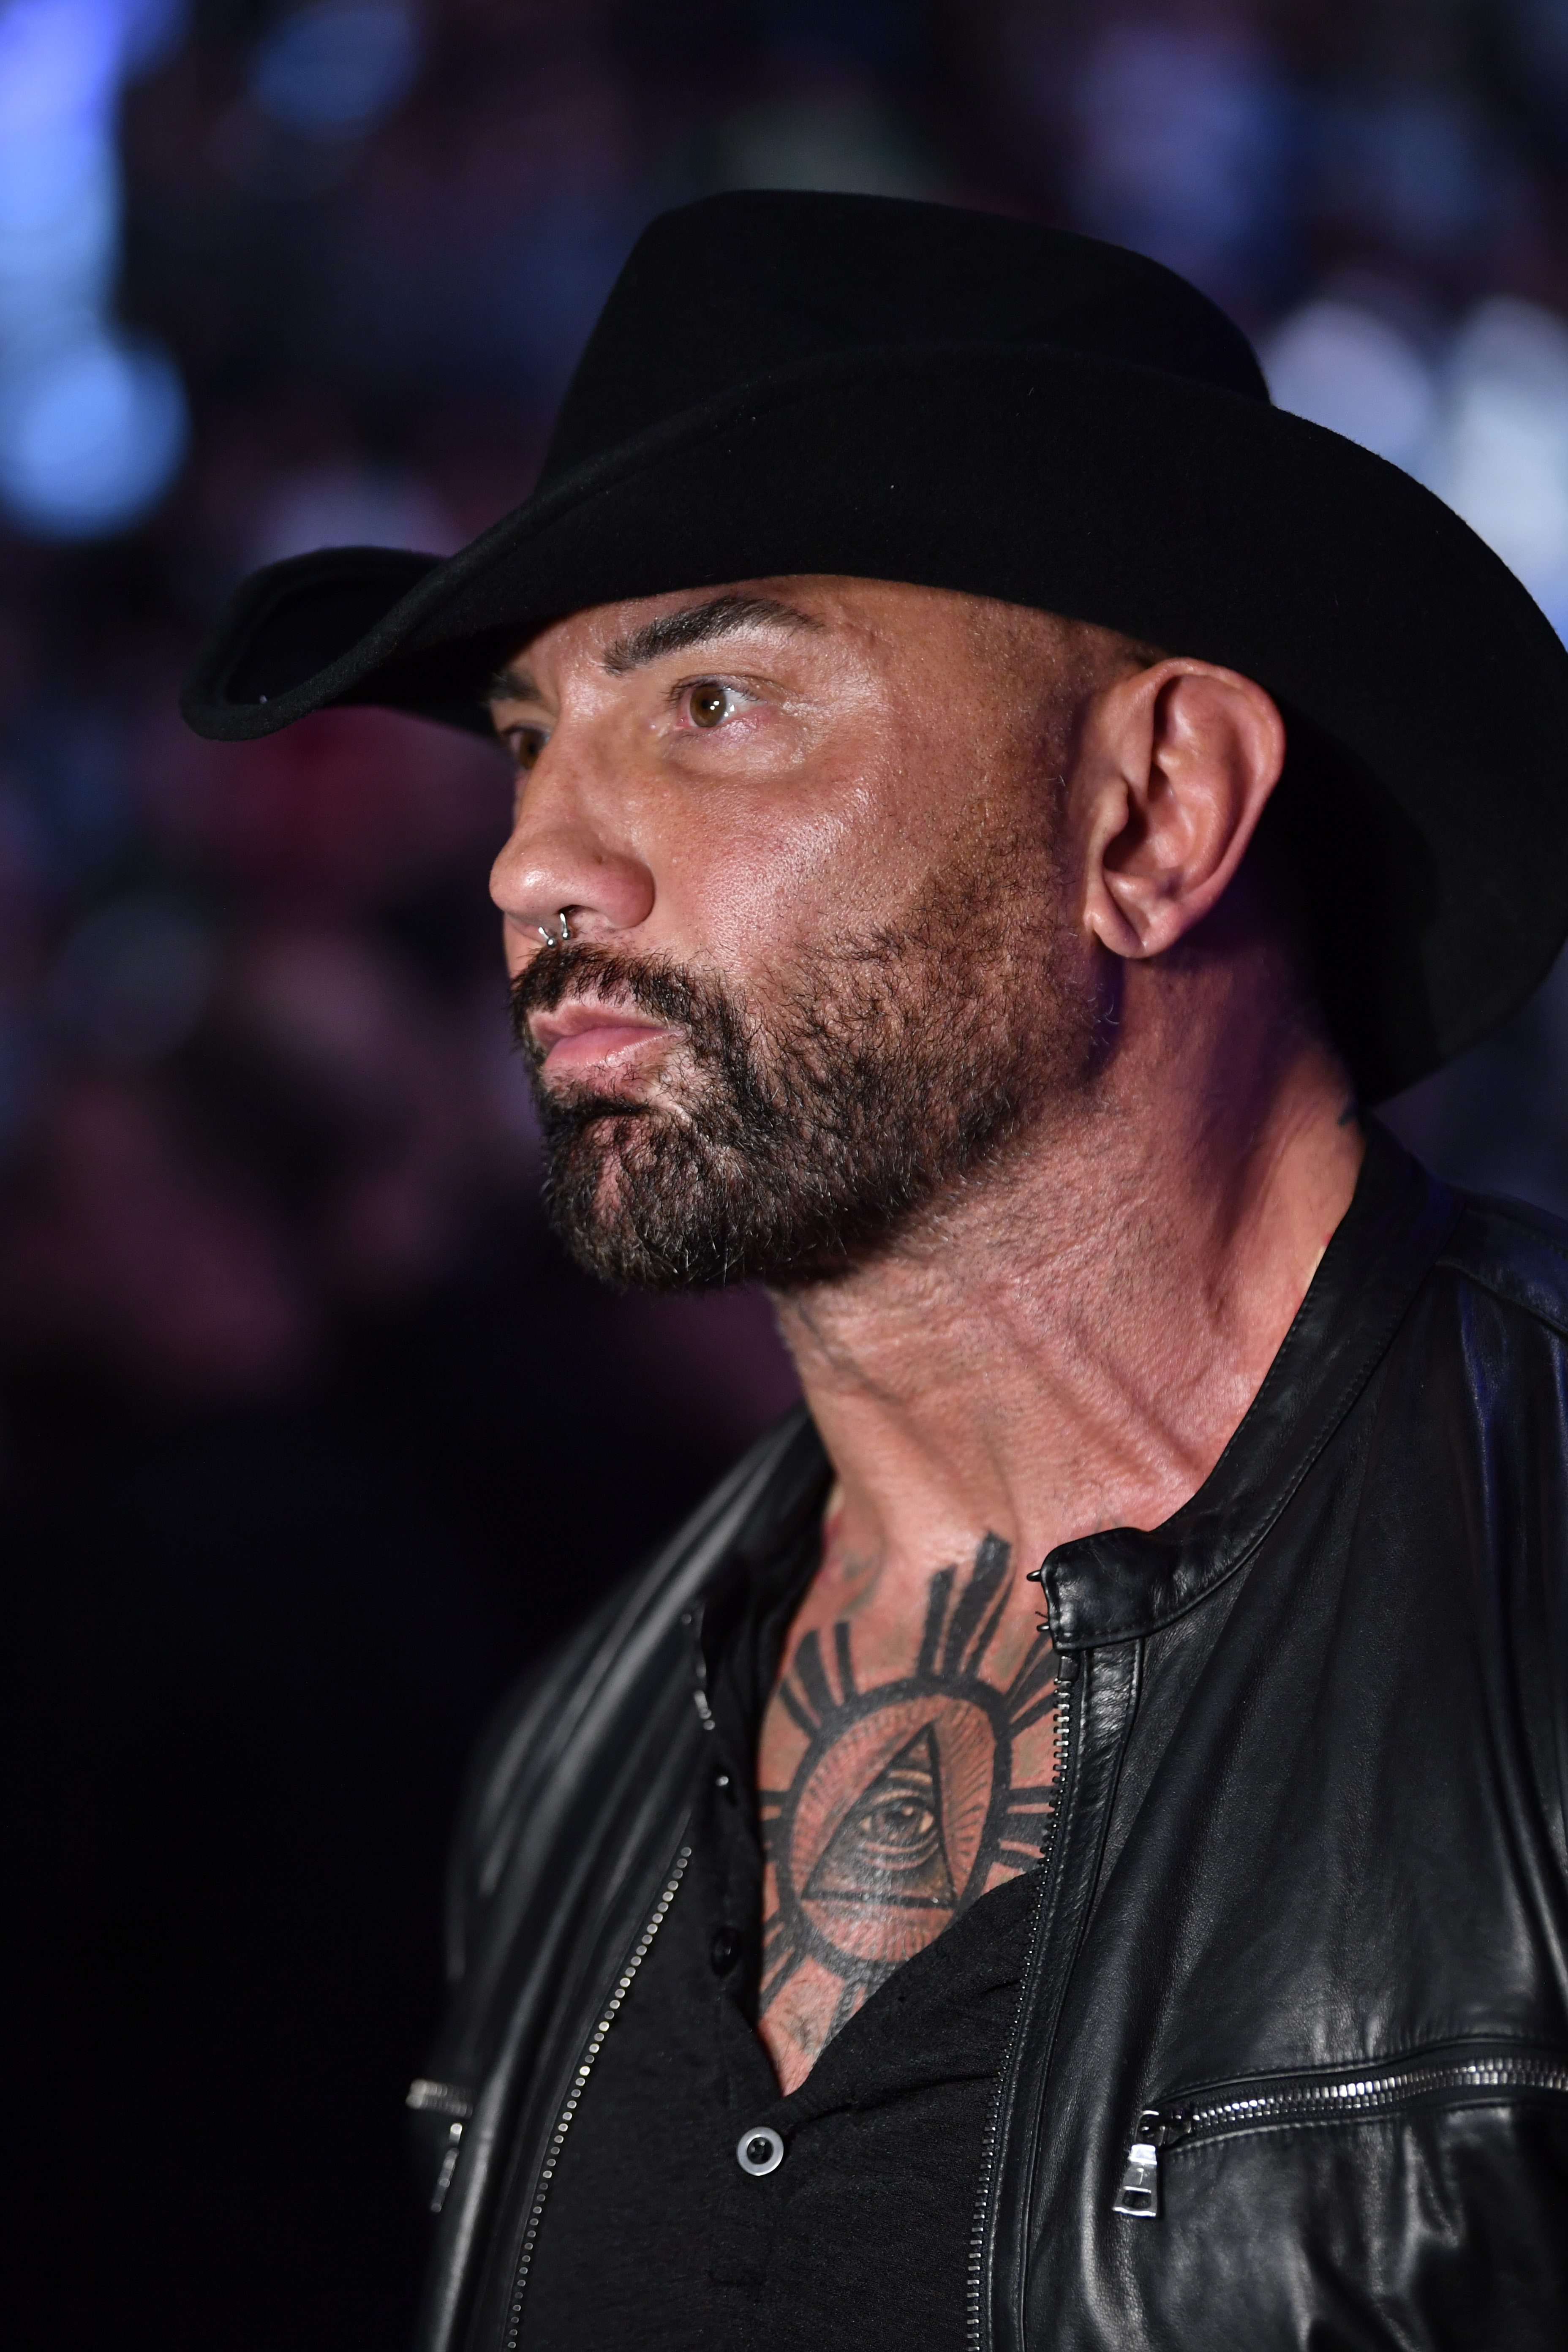 Dave Bautista attends the UFC 246 event at T-Mobile Arena on January 18, 2020, in Las Vegas, Nevada. | Source: Getty Images